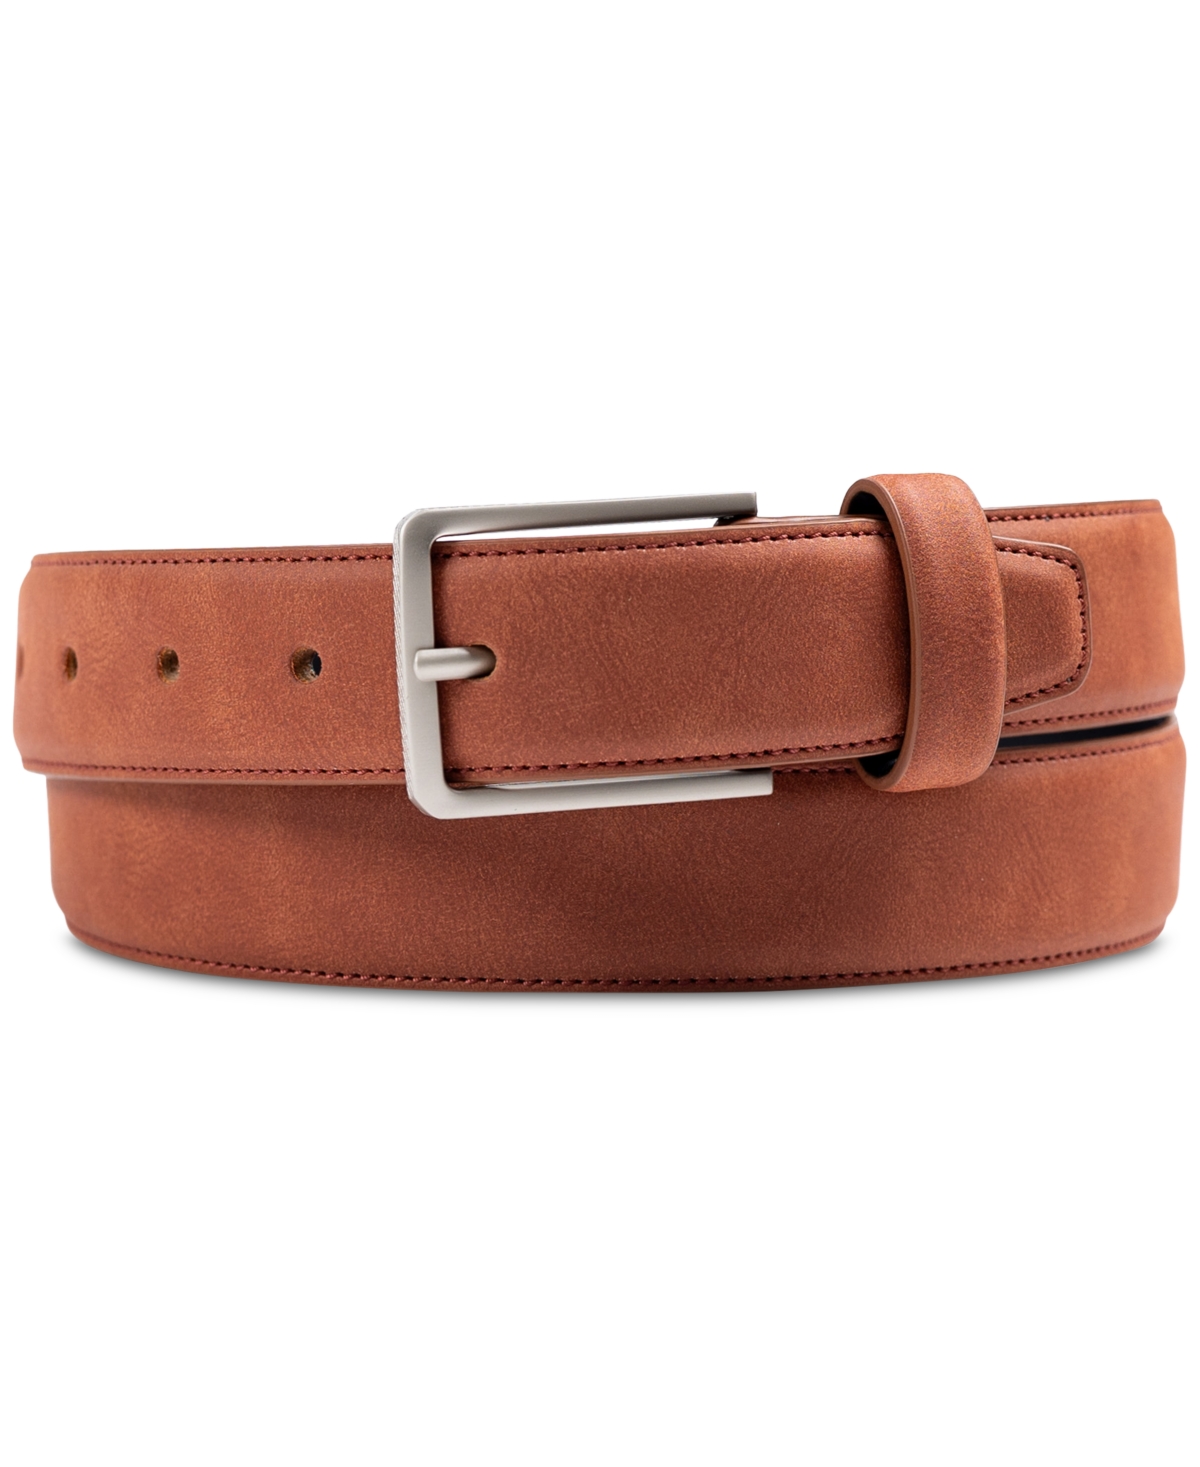 Men's Faux Suede Belt, Created for Macy's - Navy